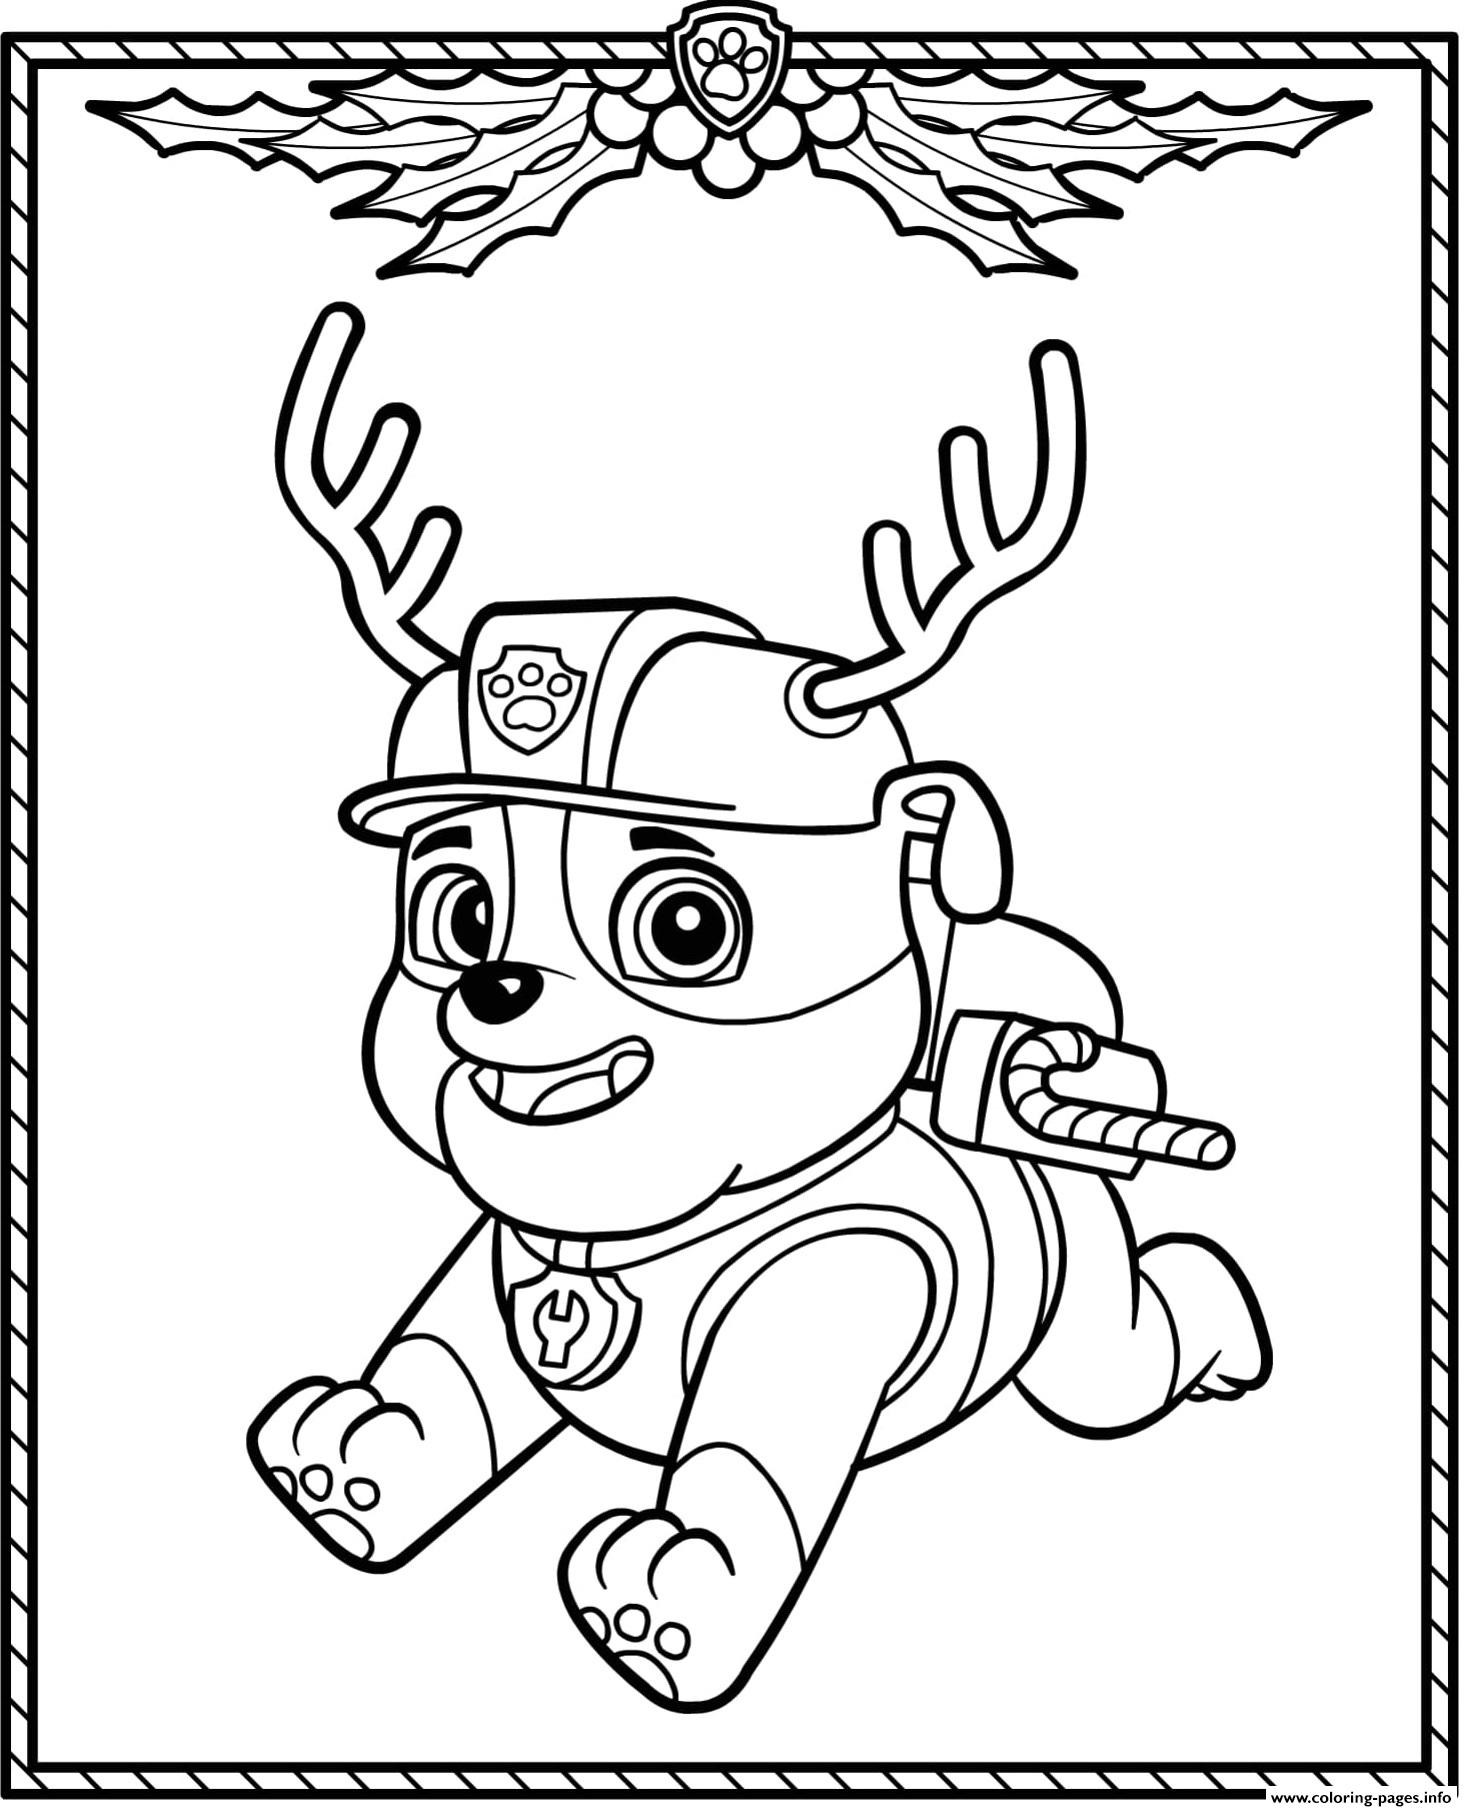 Paw Patrol Christmas Coloring Pages - Coloring Home